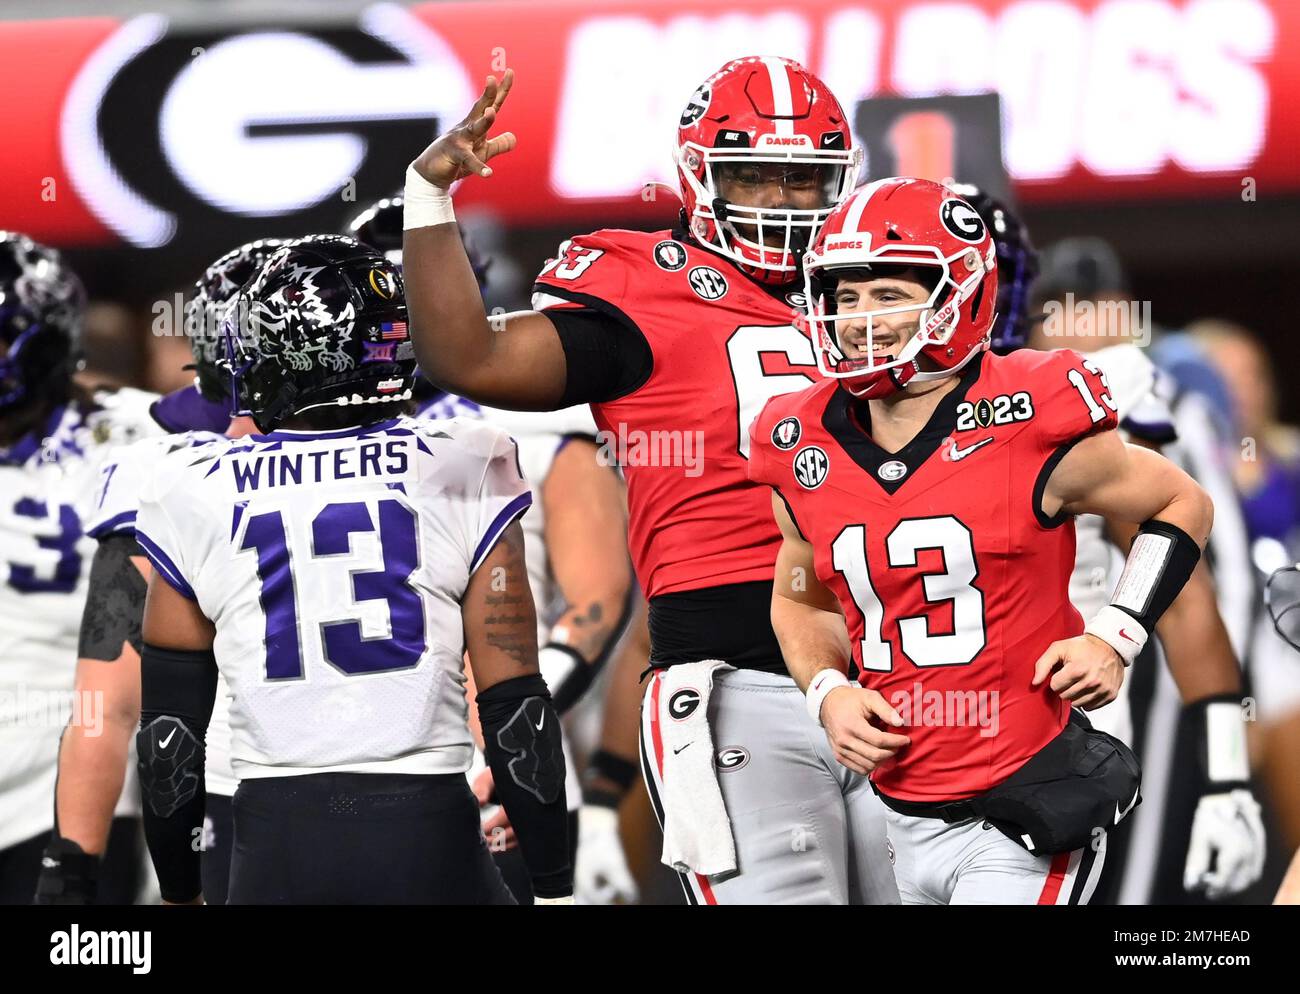 Inglewood, United States. 09th Jan, 2023. Georgia Bulldogs quarterback Stetson Bennett celebrates a touchdown in the first half against the TCU Horned Frogs at the 2023 NCAA College Football National Championship between Georgia and TCU at SoFi Stadium in Inglewood, California, on Monday, January 9, 2023. Photo by Mike Goulding/UPI Credit: UPI/Alamy Live News Stock Photo